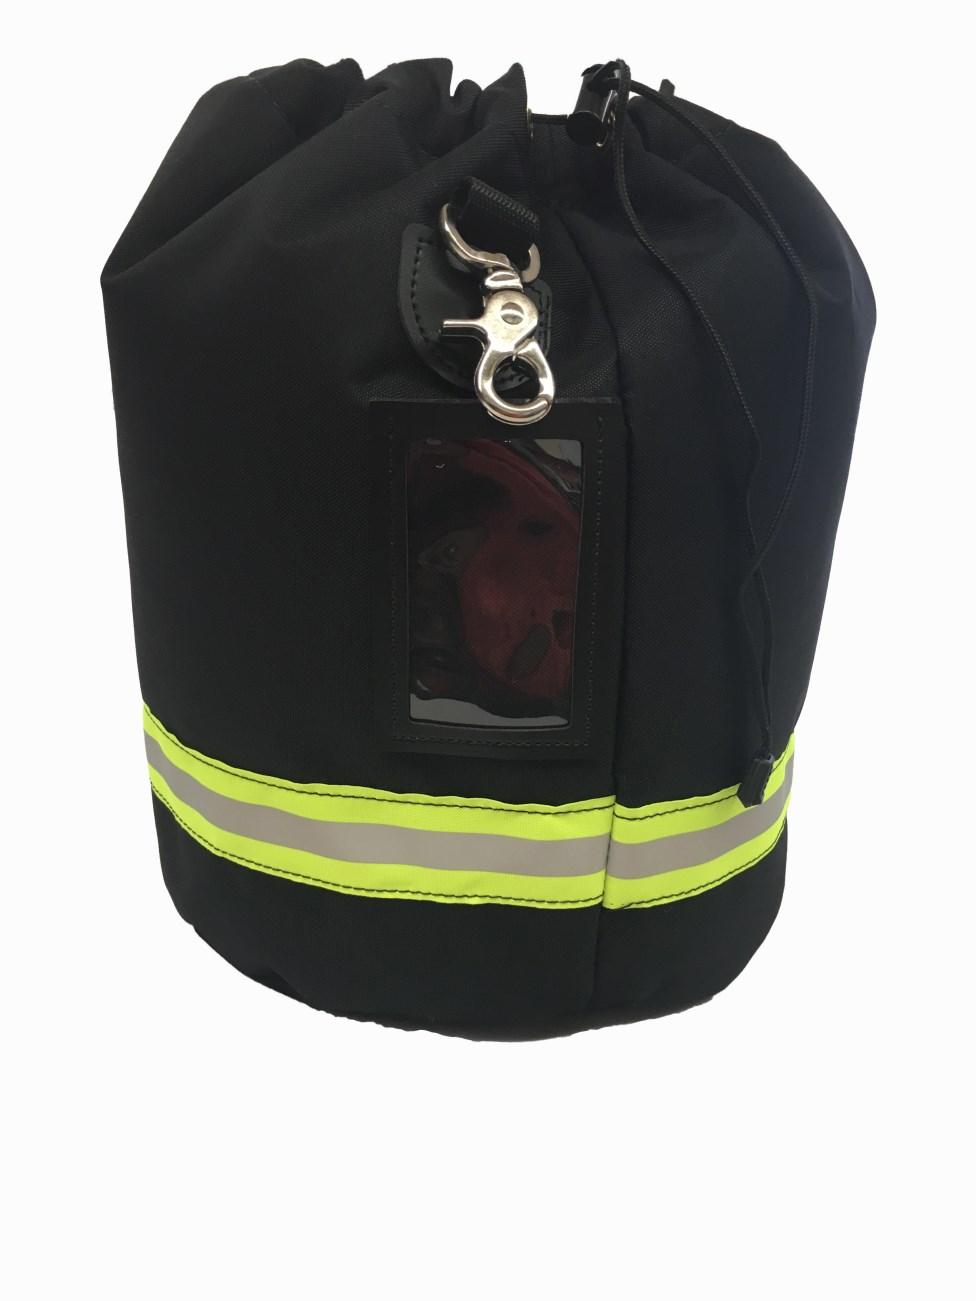 Constructed of heavy-duty RipStop vinyl. Available in Red, Green, and Blue. ITEM #TB22 Hydrant Bag 22 L x 6 H x 6 W Allows you to have your tools where you need them.